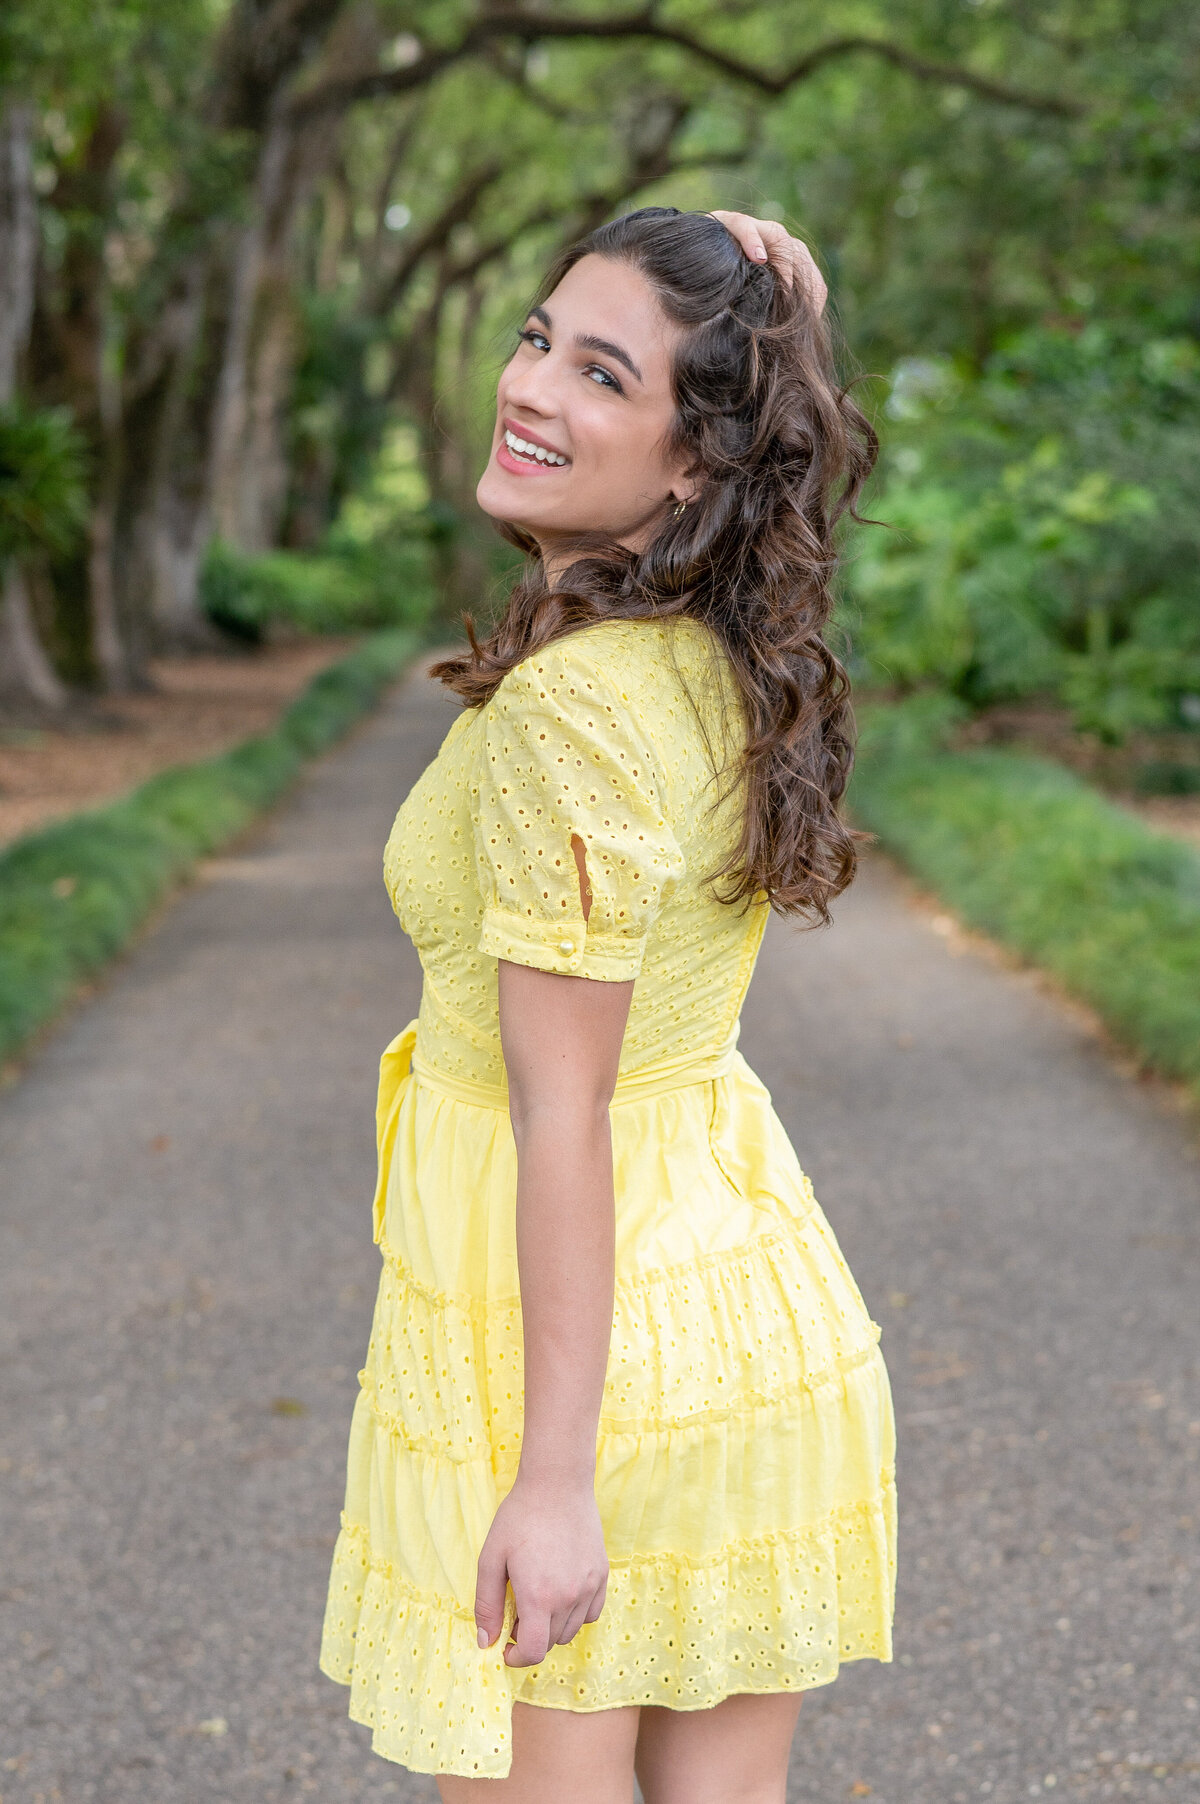 High school senior girl wearing a yellow dress with hand in her hair looks back smiling at the camera by Orlando senior Photographer Khim Higgins.